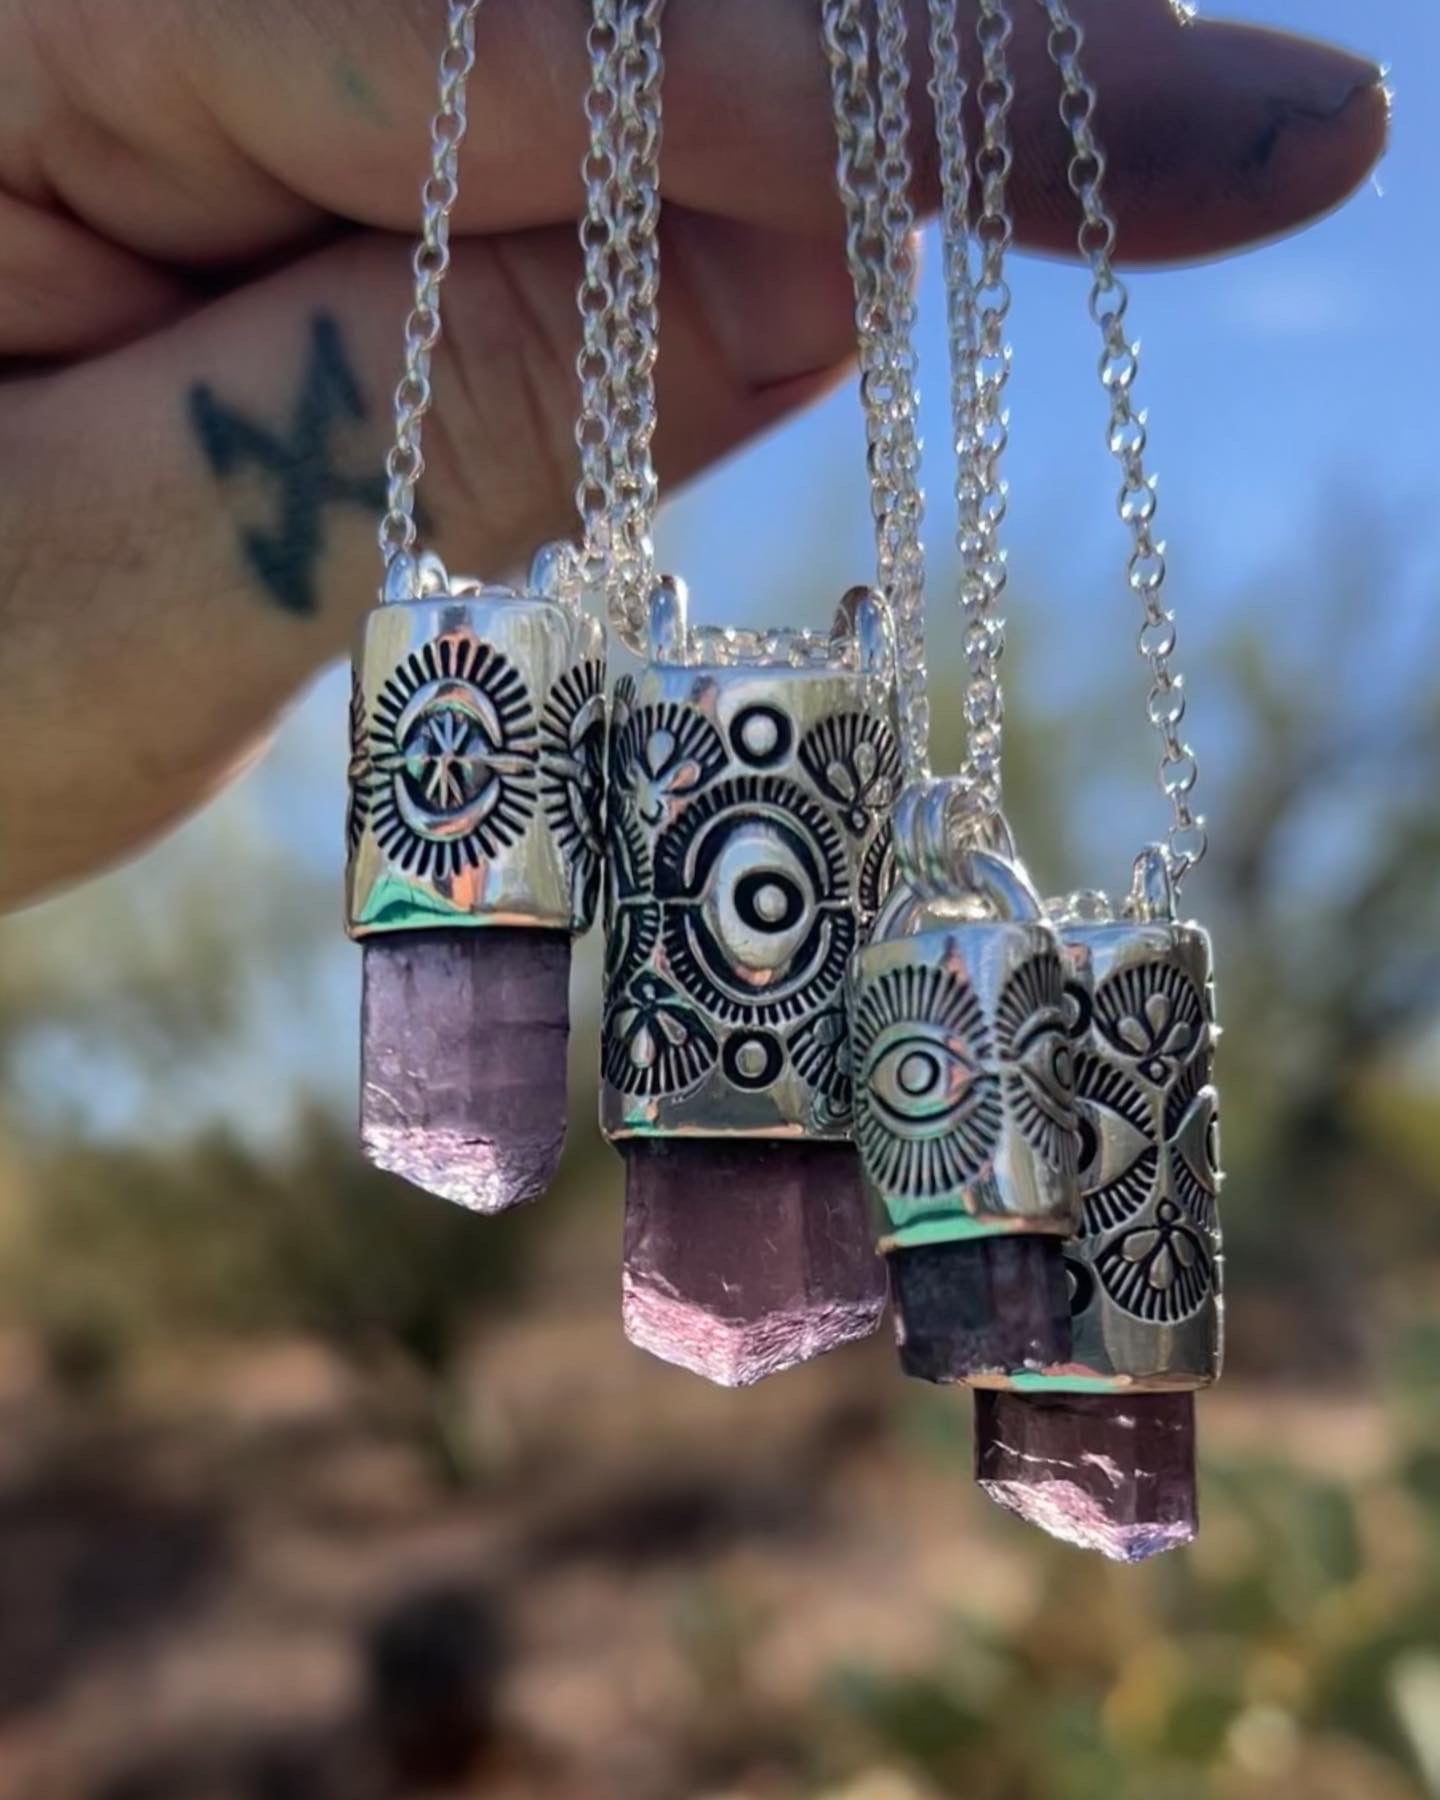 Purple Scapolite Tumbleweed/Prickly Pear Talisman Necklace